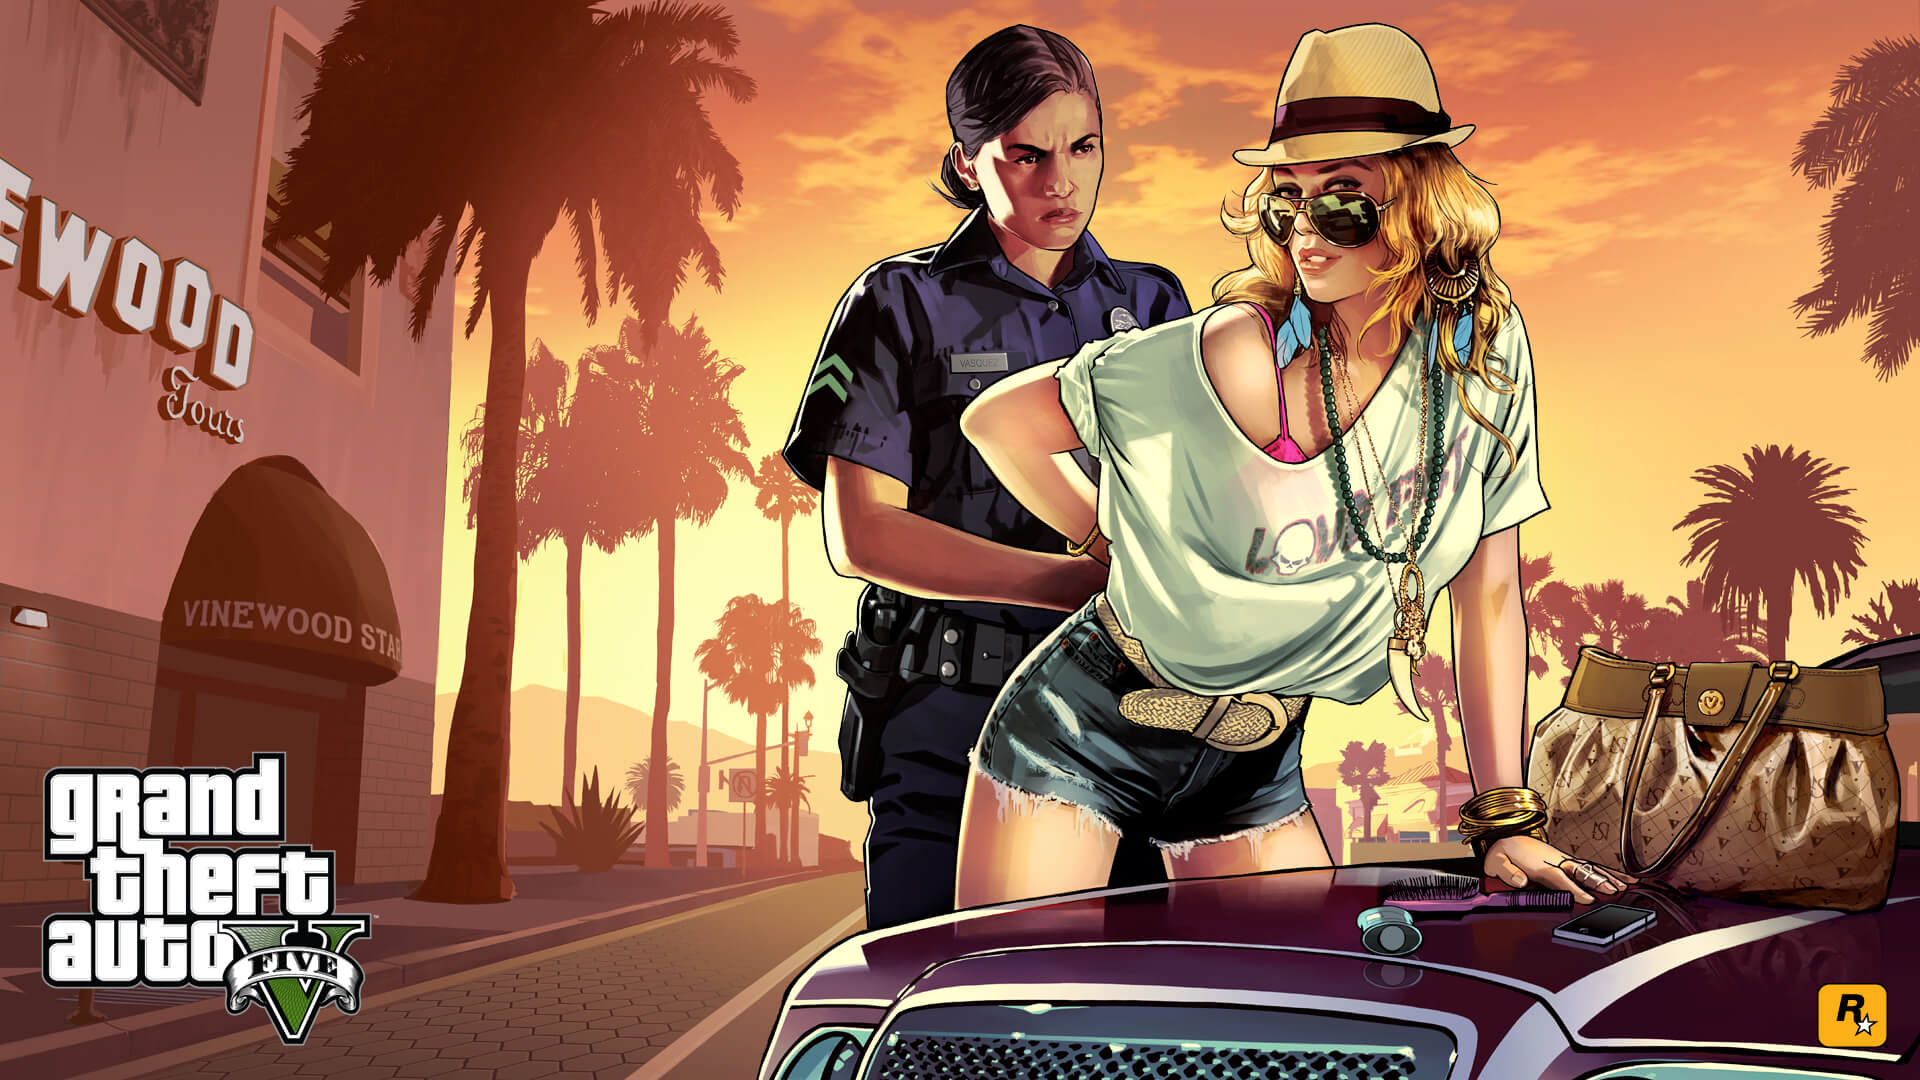 Gta vice city download for windows 7